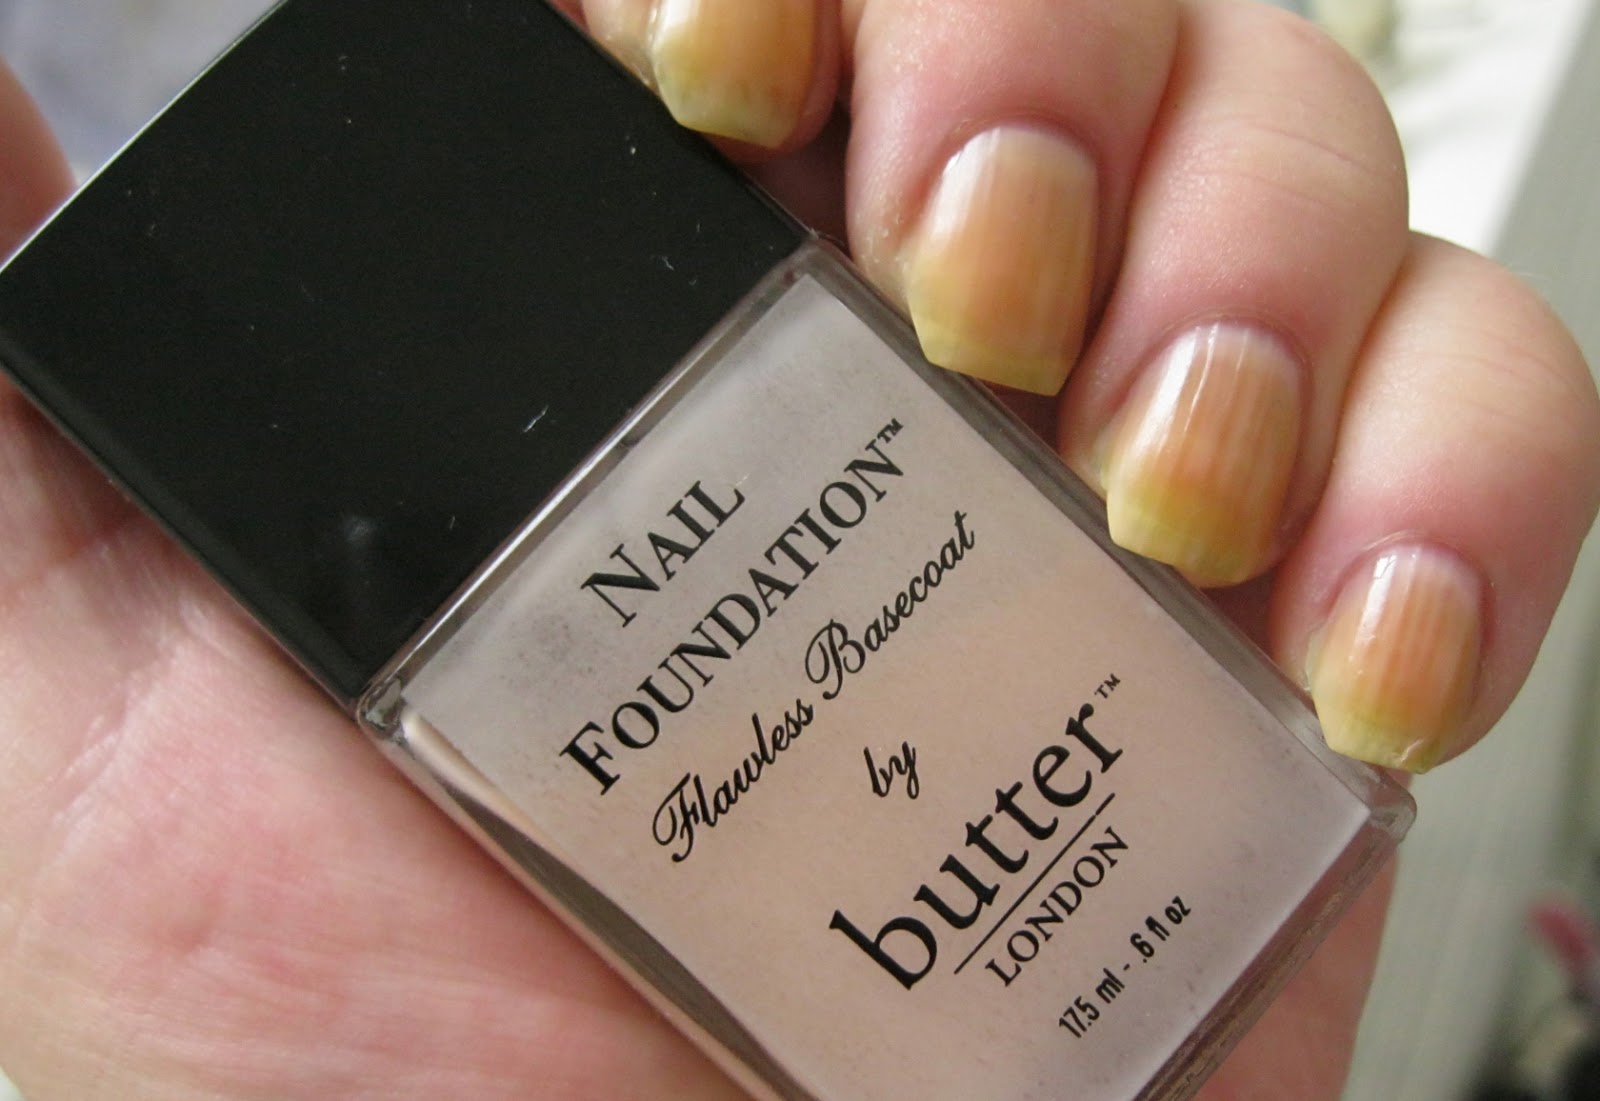 7. Butter London Nail Lacquer in "Fruit Machine" - wide 4